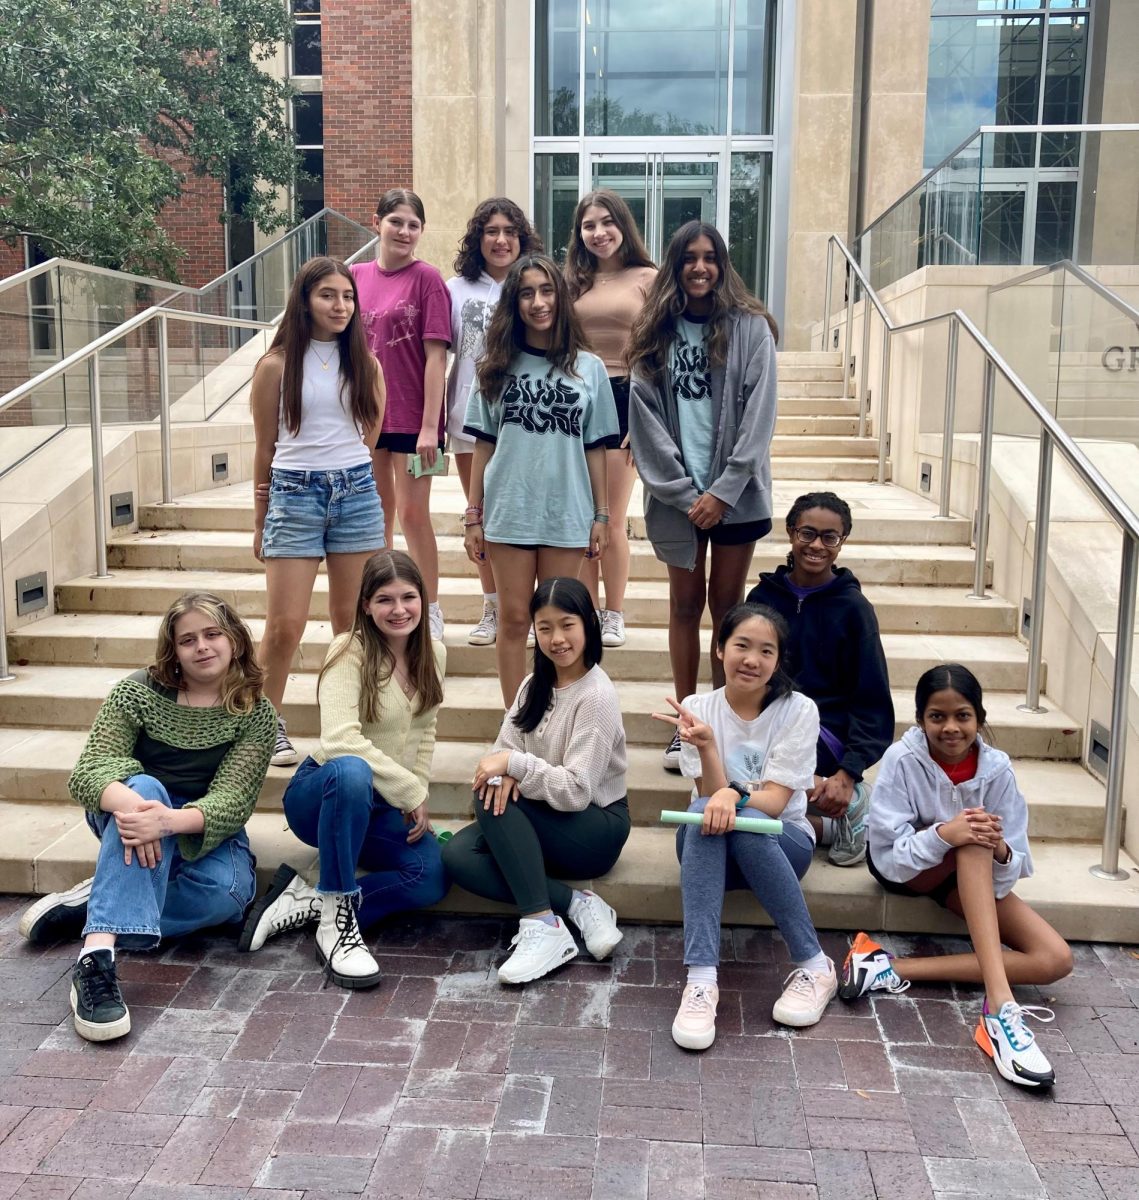 The Middle School Dance Company team poses for a photo on SMUs campus after the performance. Photo courtesy of Kelly McCain.